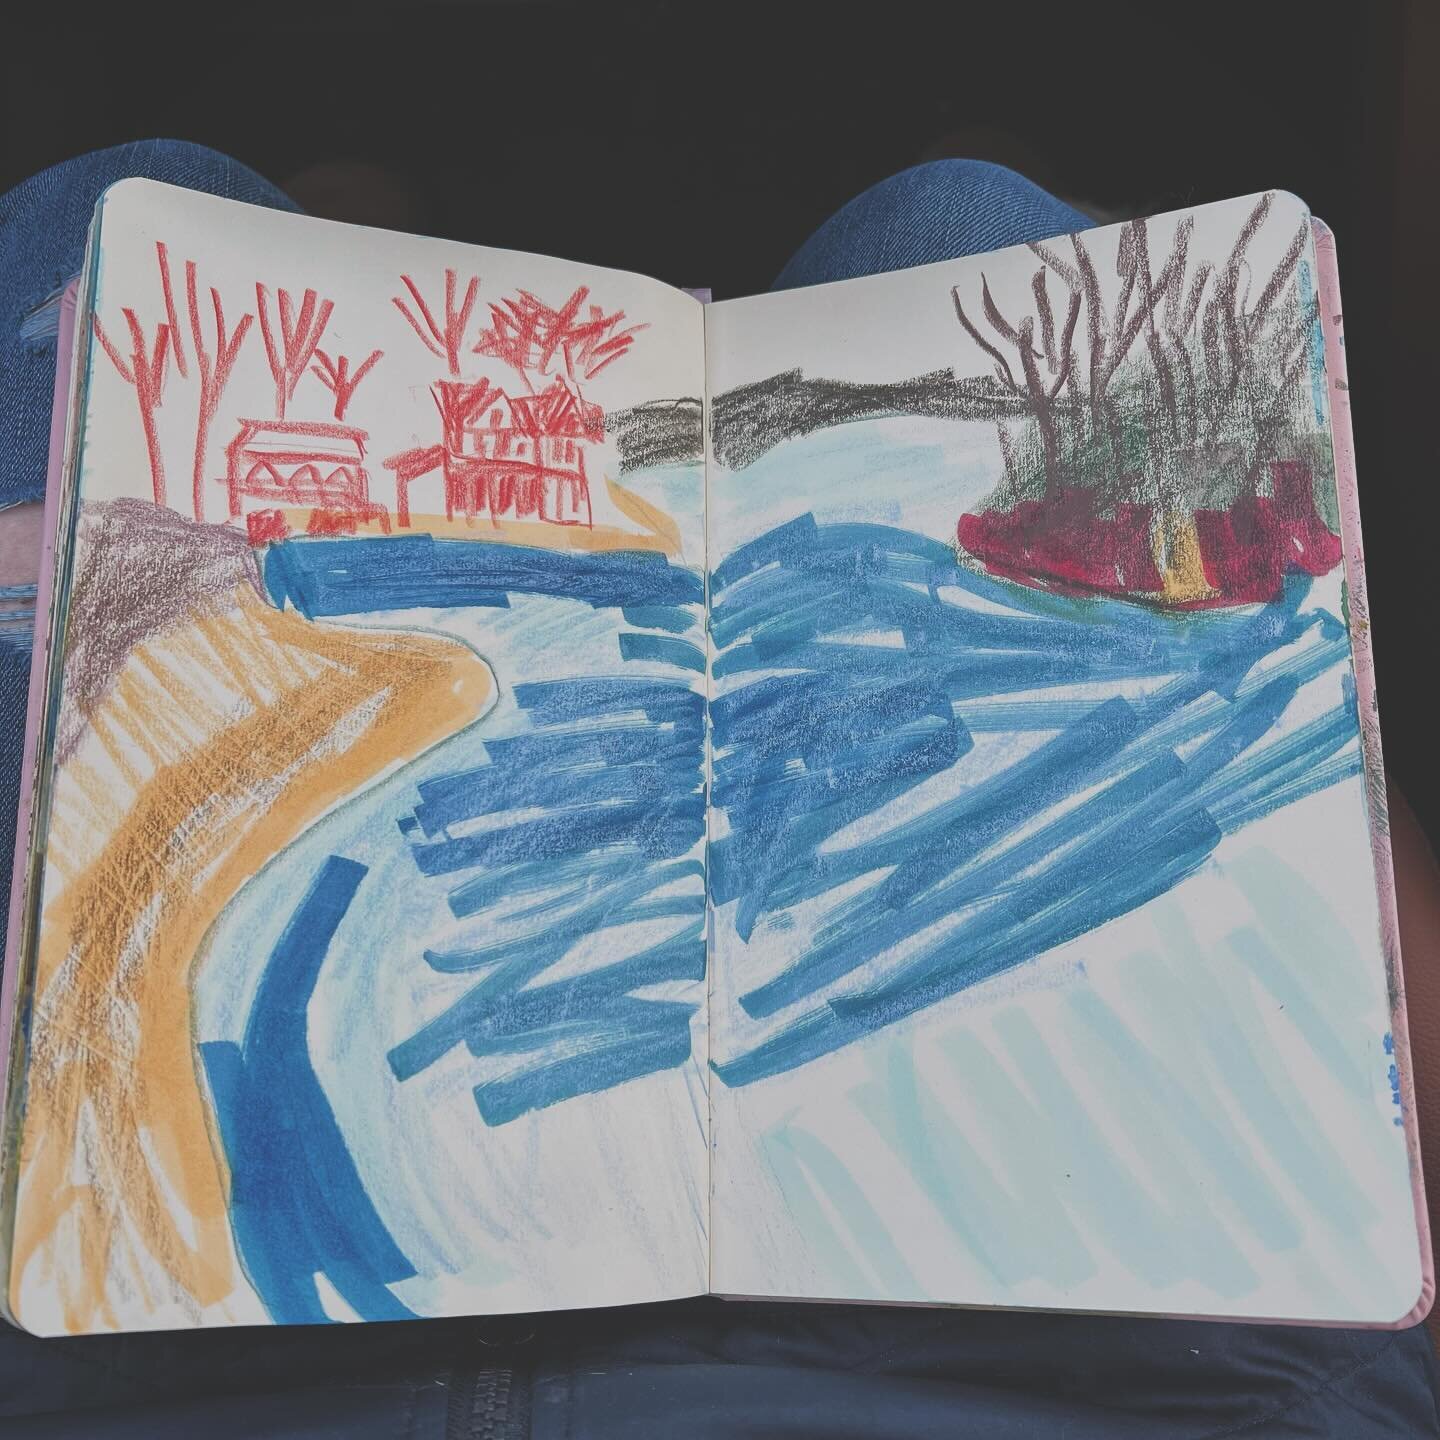 Car sketching! It&rsquo;s so cold out but I needed some connection with nature and colorful scribbles. Onset Bay. Home.

#sketchbookpages #newenglandartist #sketchbookartist #dailysketching #landscapeartist